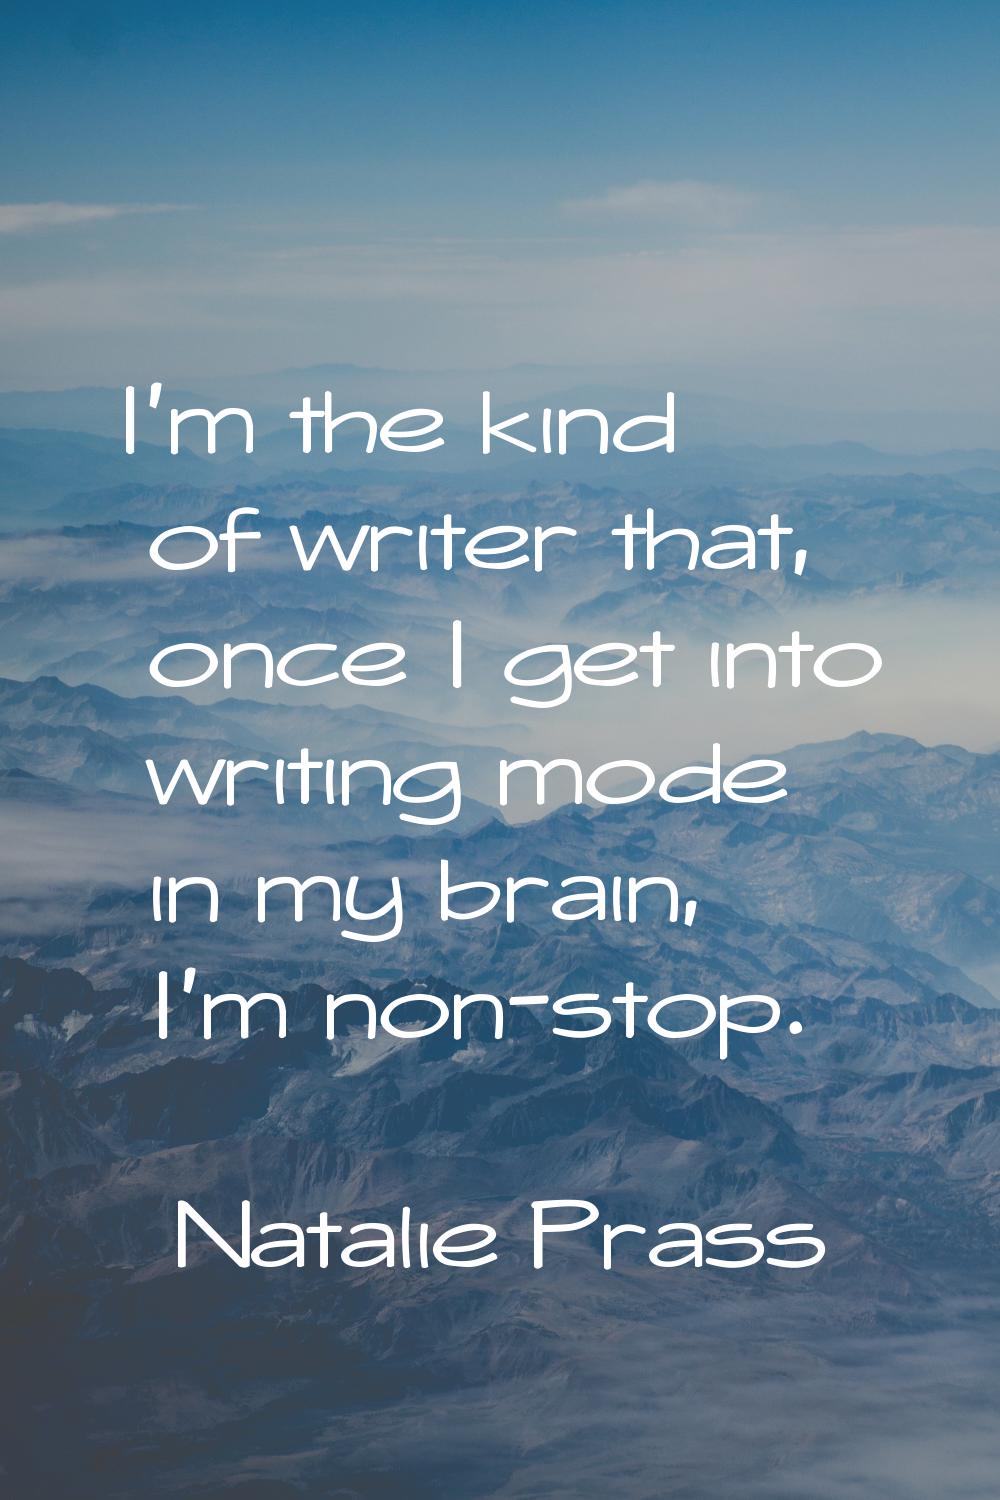 I'm the kind of writer that, once I get into writing mode in my brain, I'm non-stop.